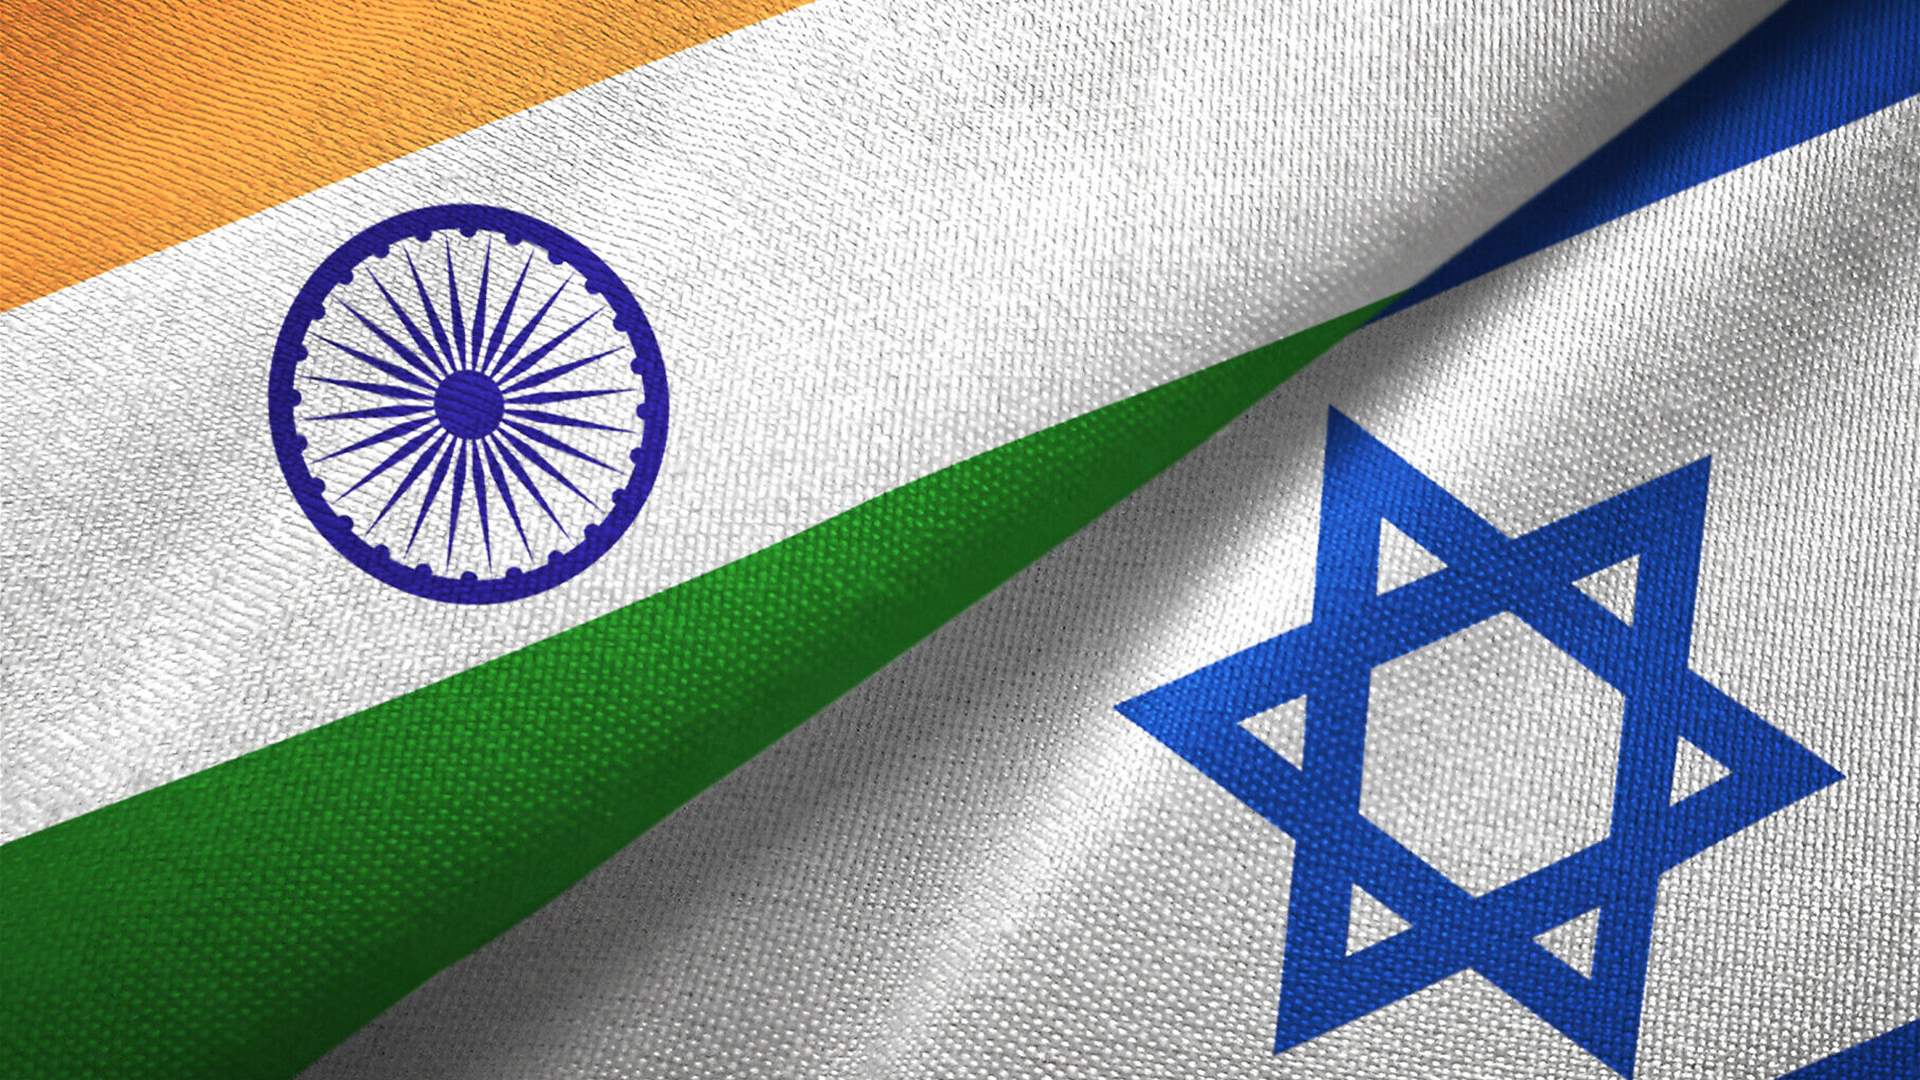 Israel&#39;s military exports to India unaffected by Gaza war